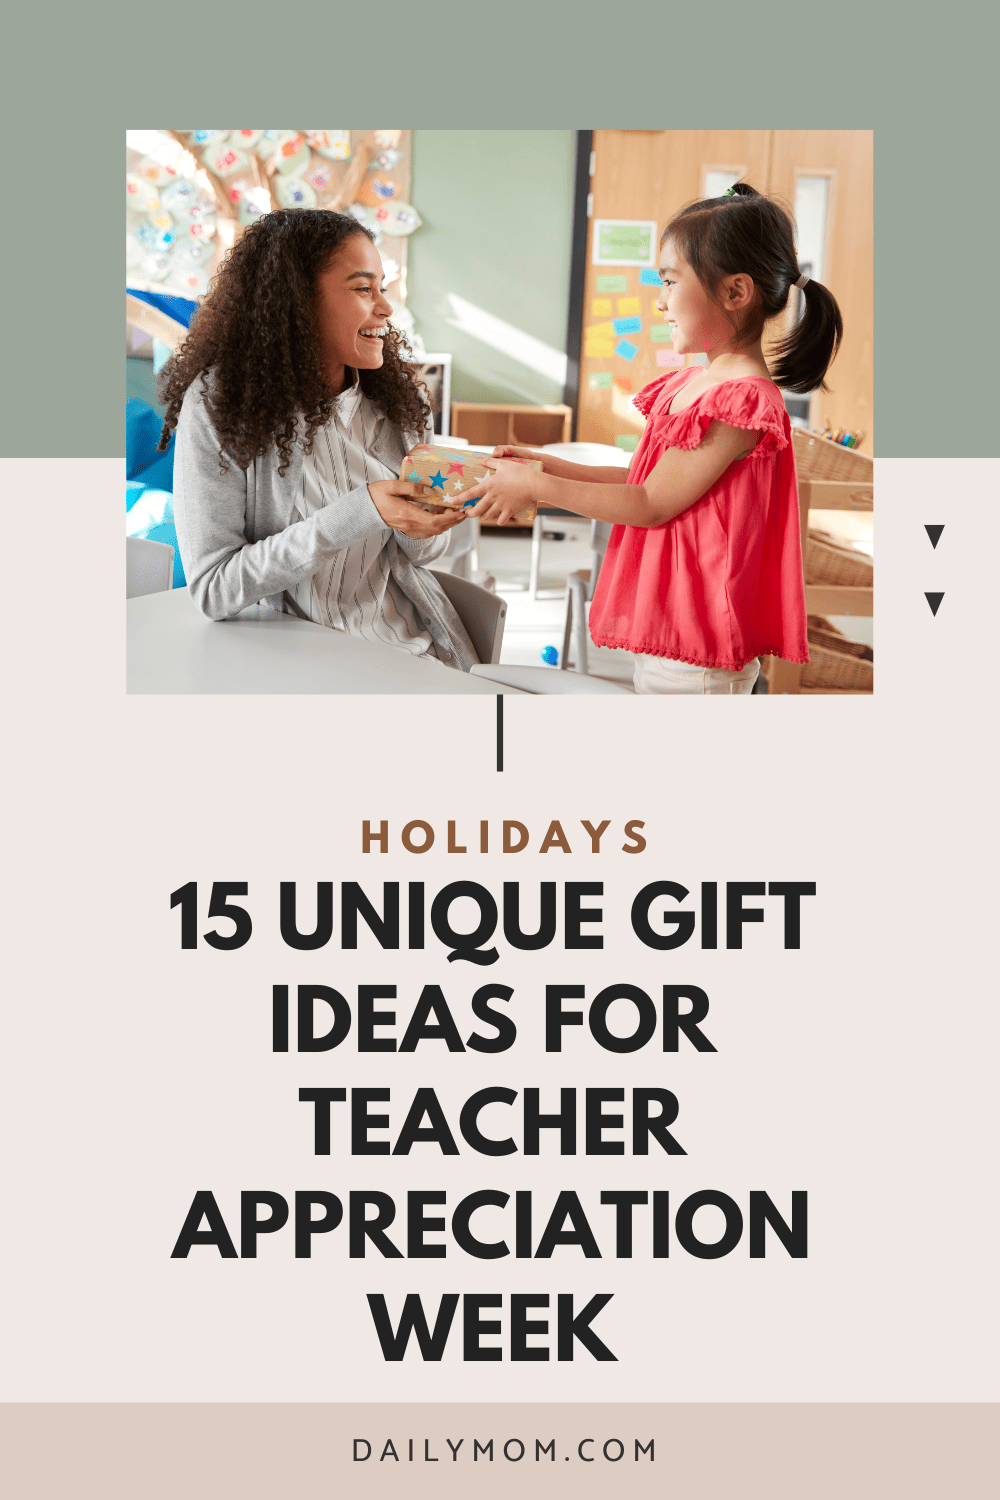 15 Unique And Thoughtful Gift Ideas For Teacher Appreciation Week 1 Daily Mom, Magazine For Families